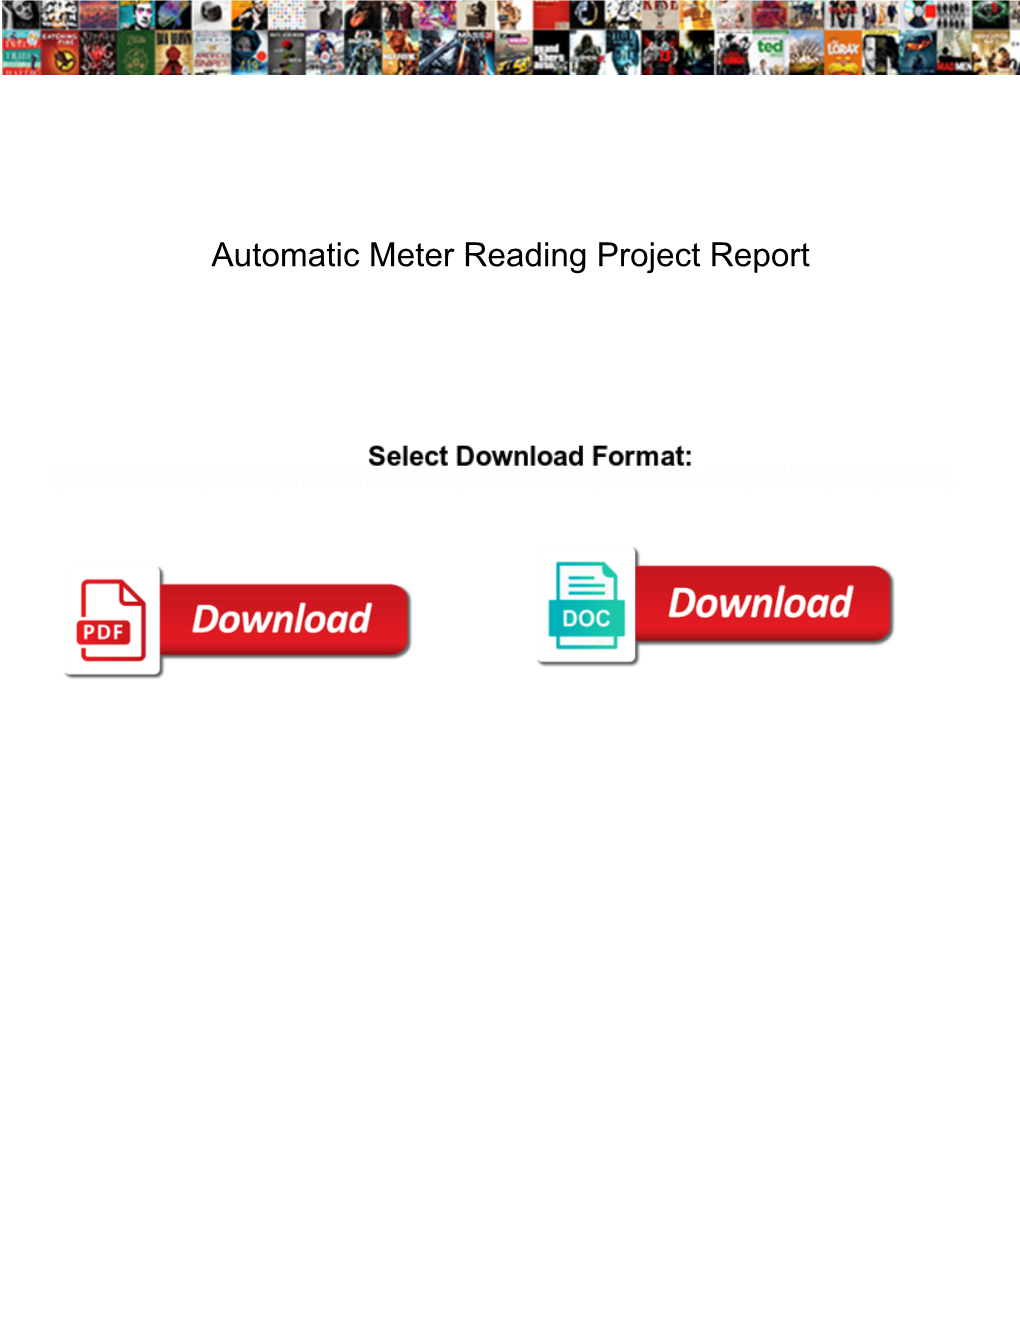 Automatic Meter Reading Project Report